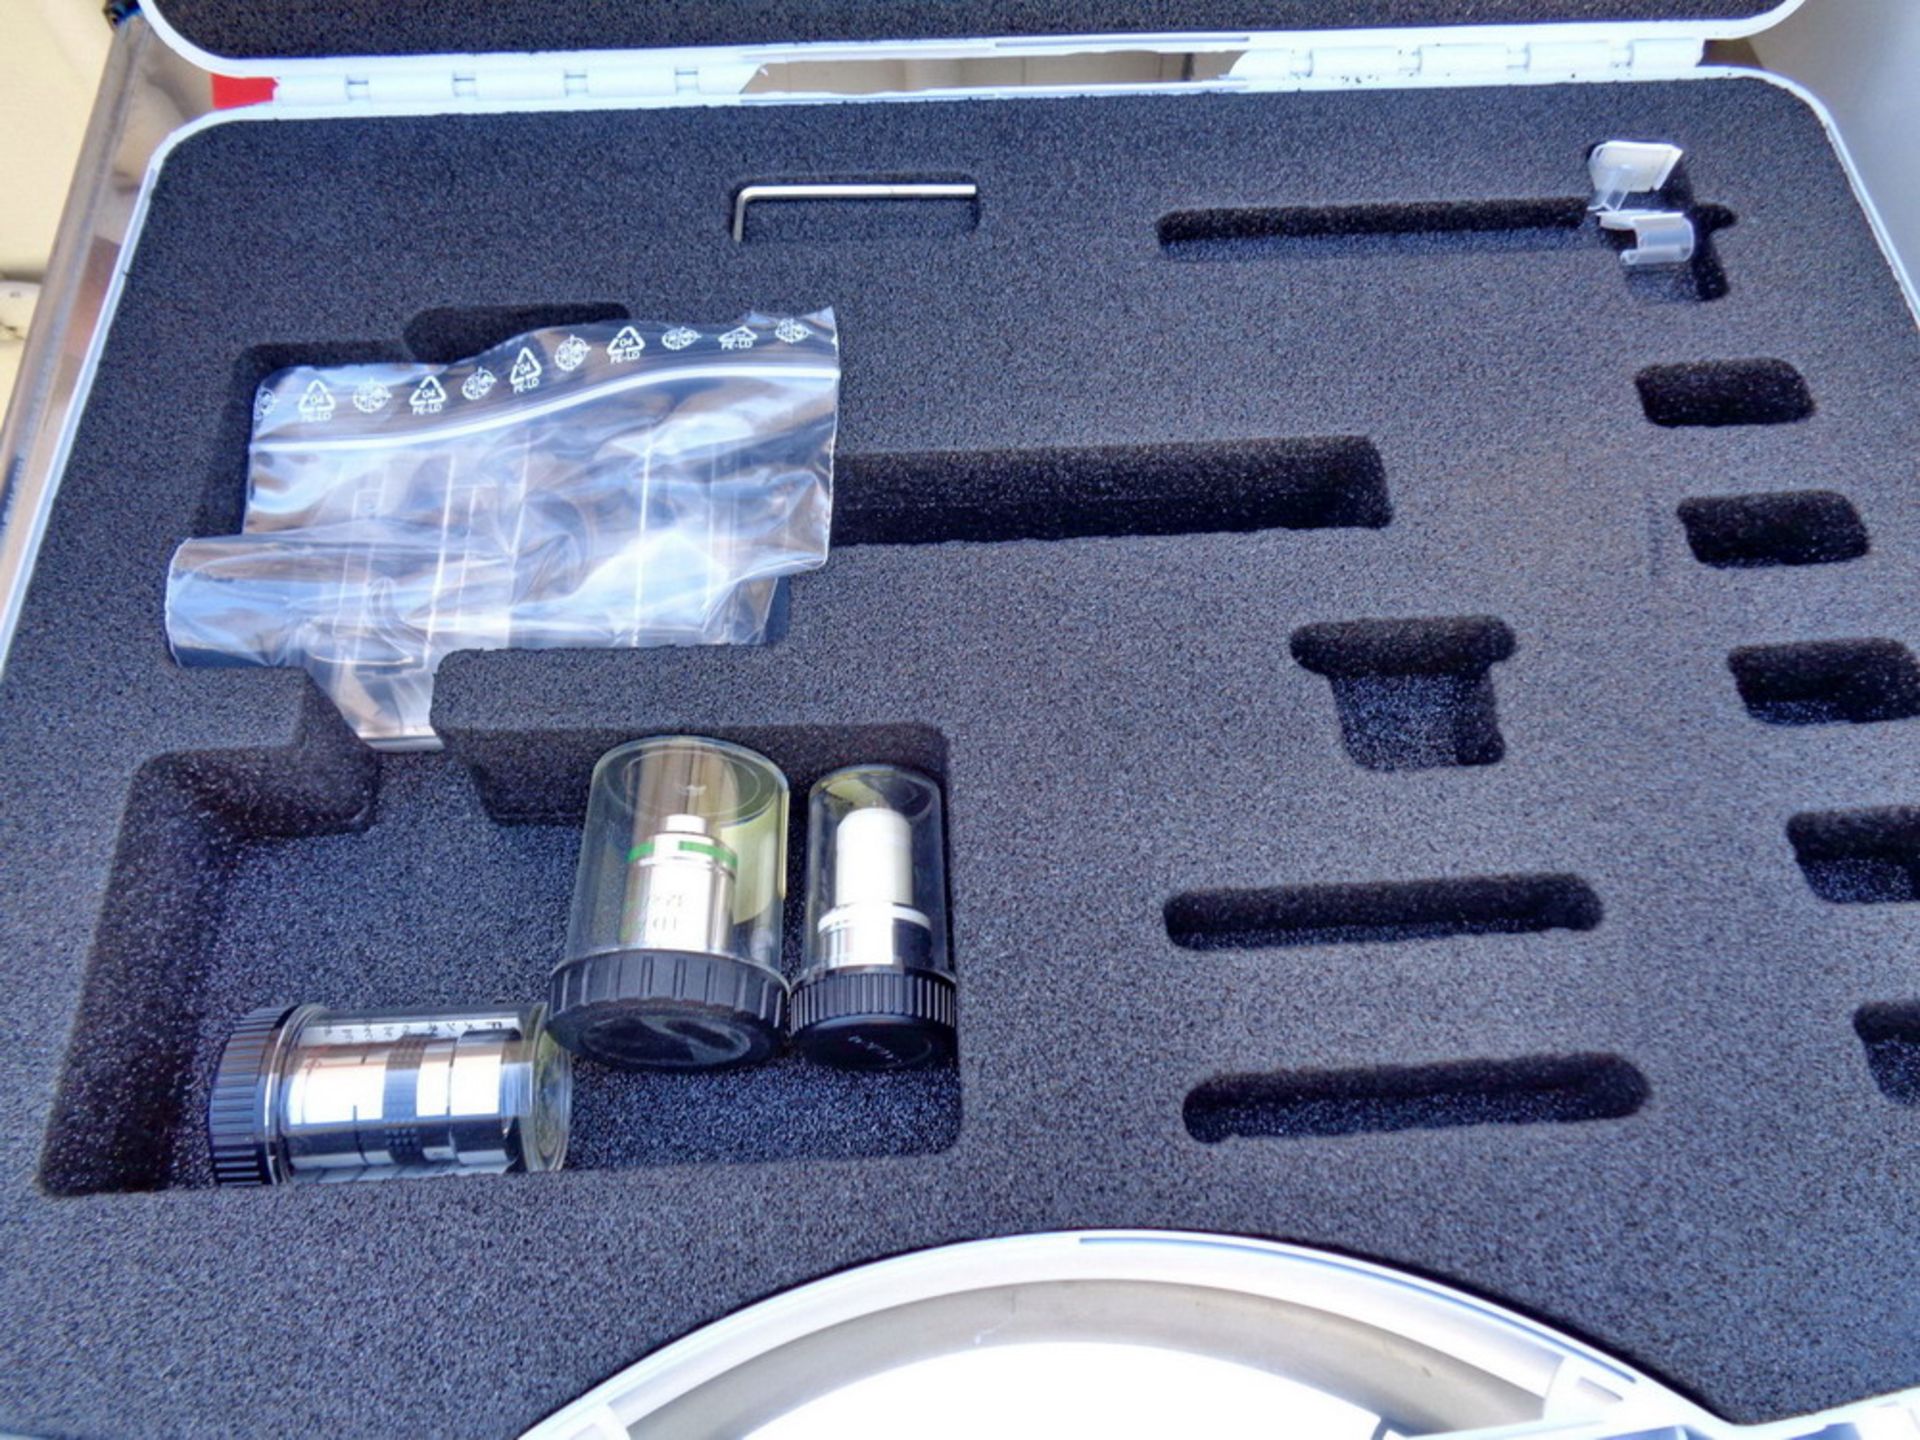 Zeiss ApoTome Axio Imager Case (incomplete) - Image 2 of 2